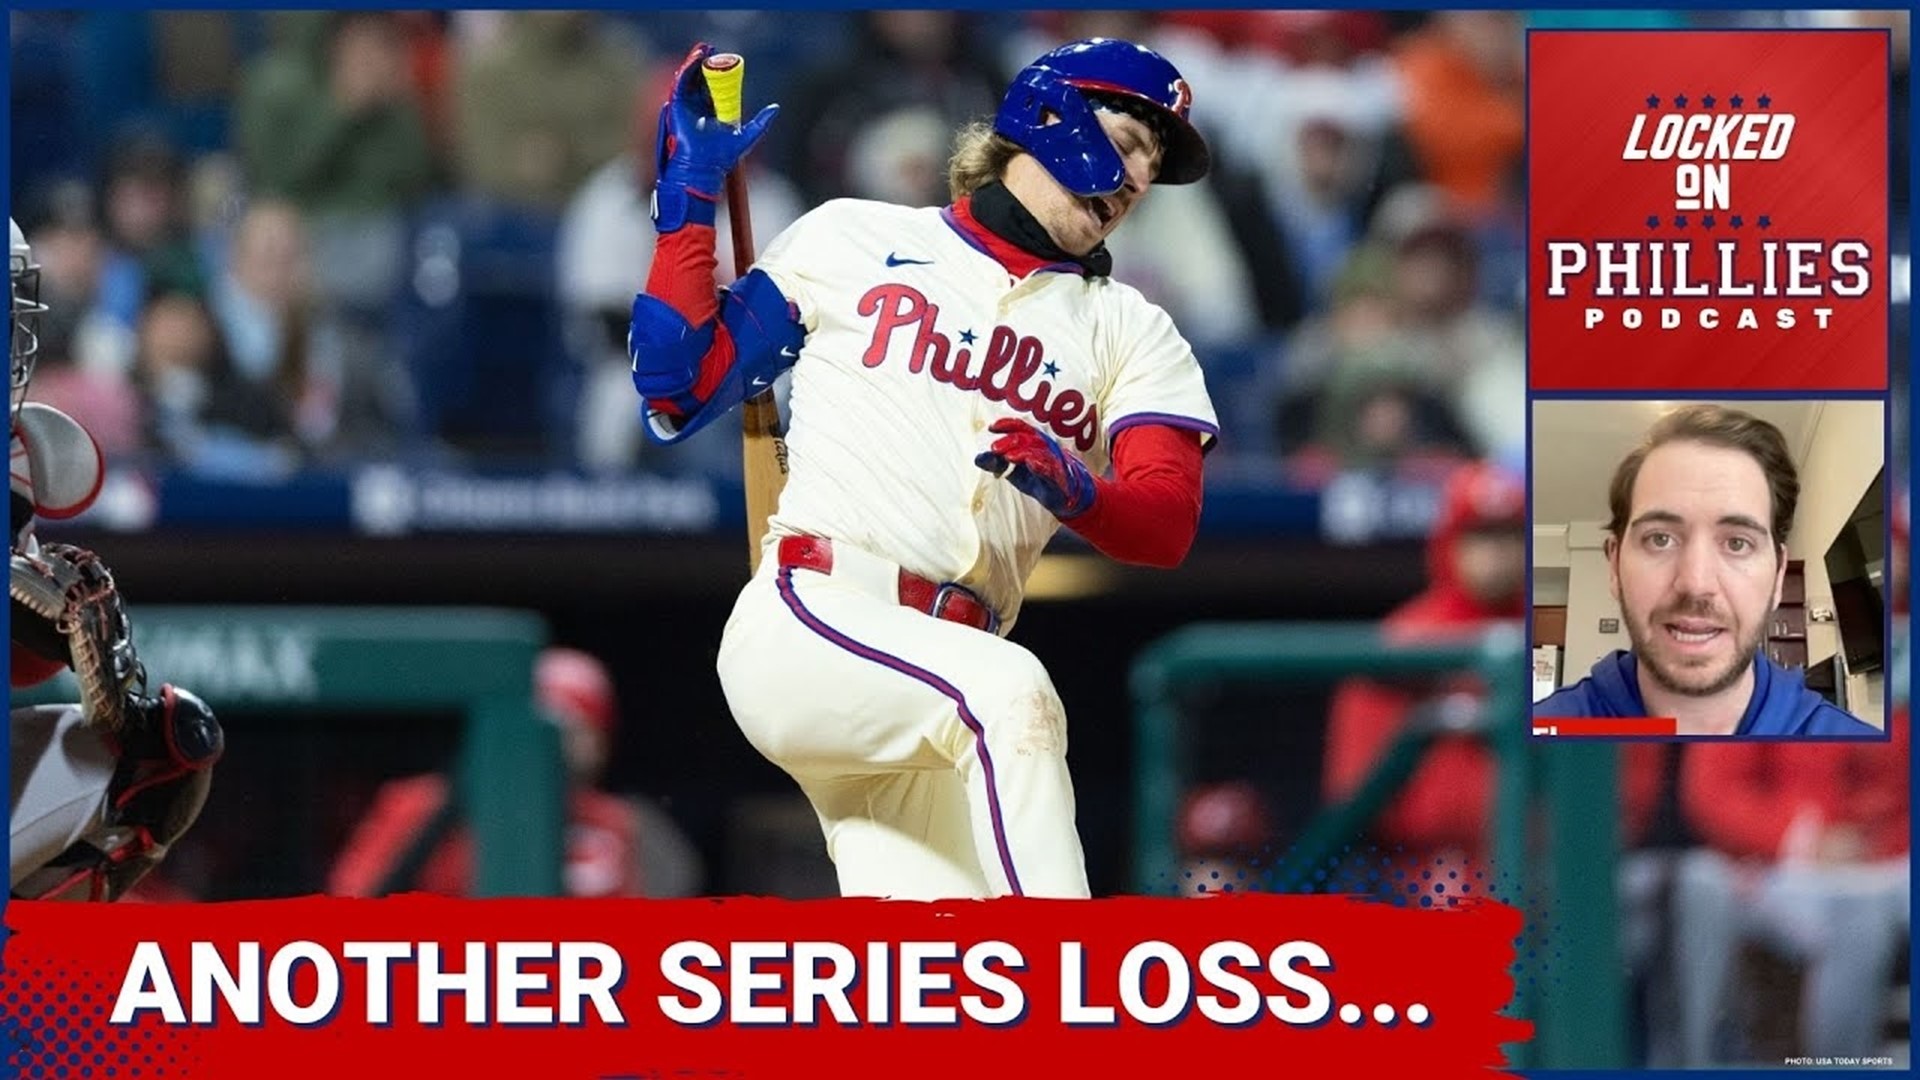 In today's episode, Connor talks about a brutal day at the ballpark as the Philadelphia Phillies lose the game and series to the Cincinnati Reds.